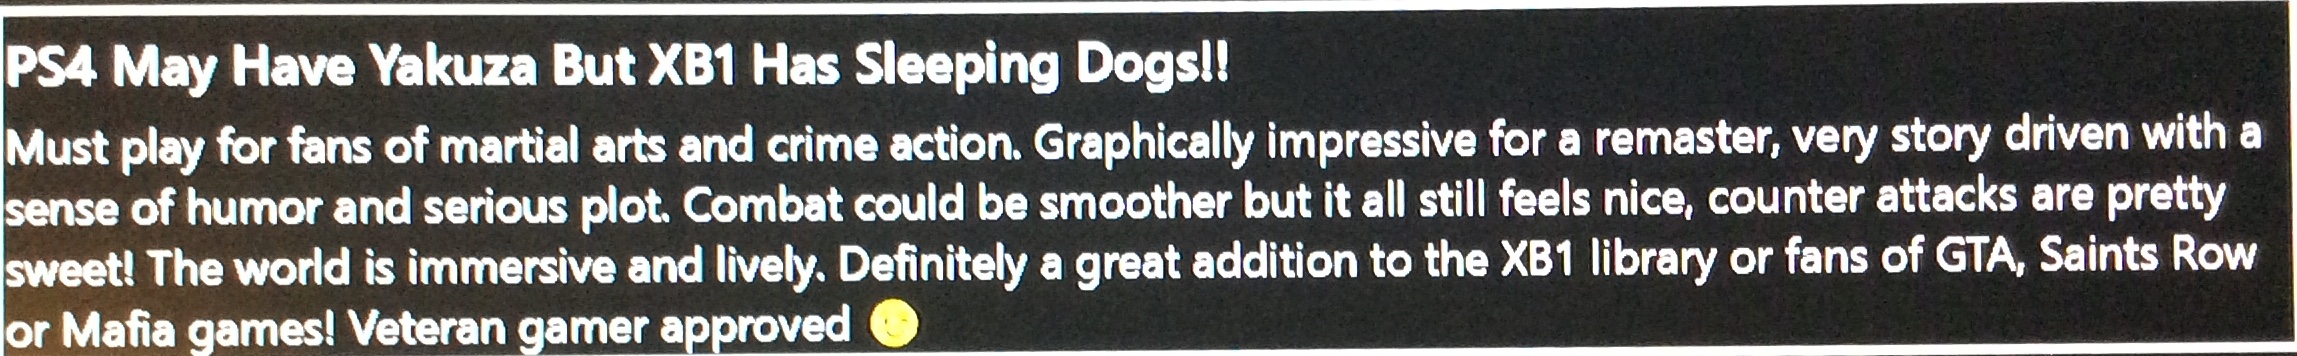 Sleeping Dogs Definitive review 1/2/2020 on MS Store by T3KTORO22.